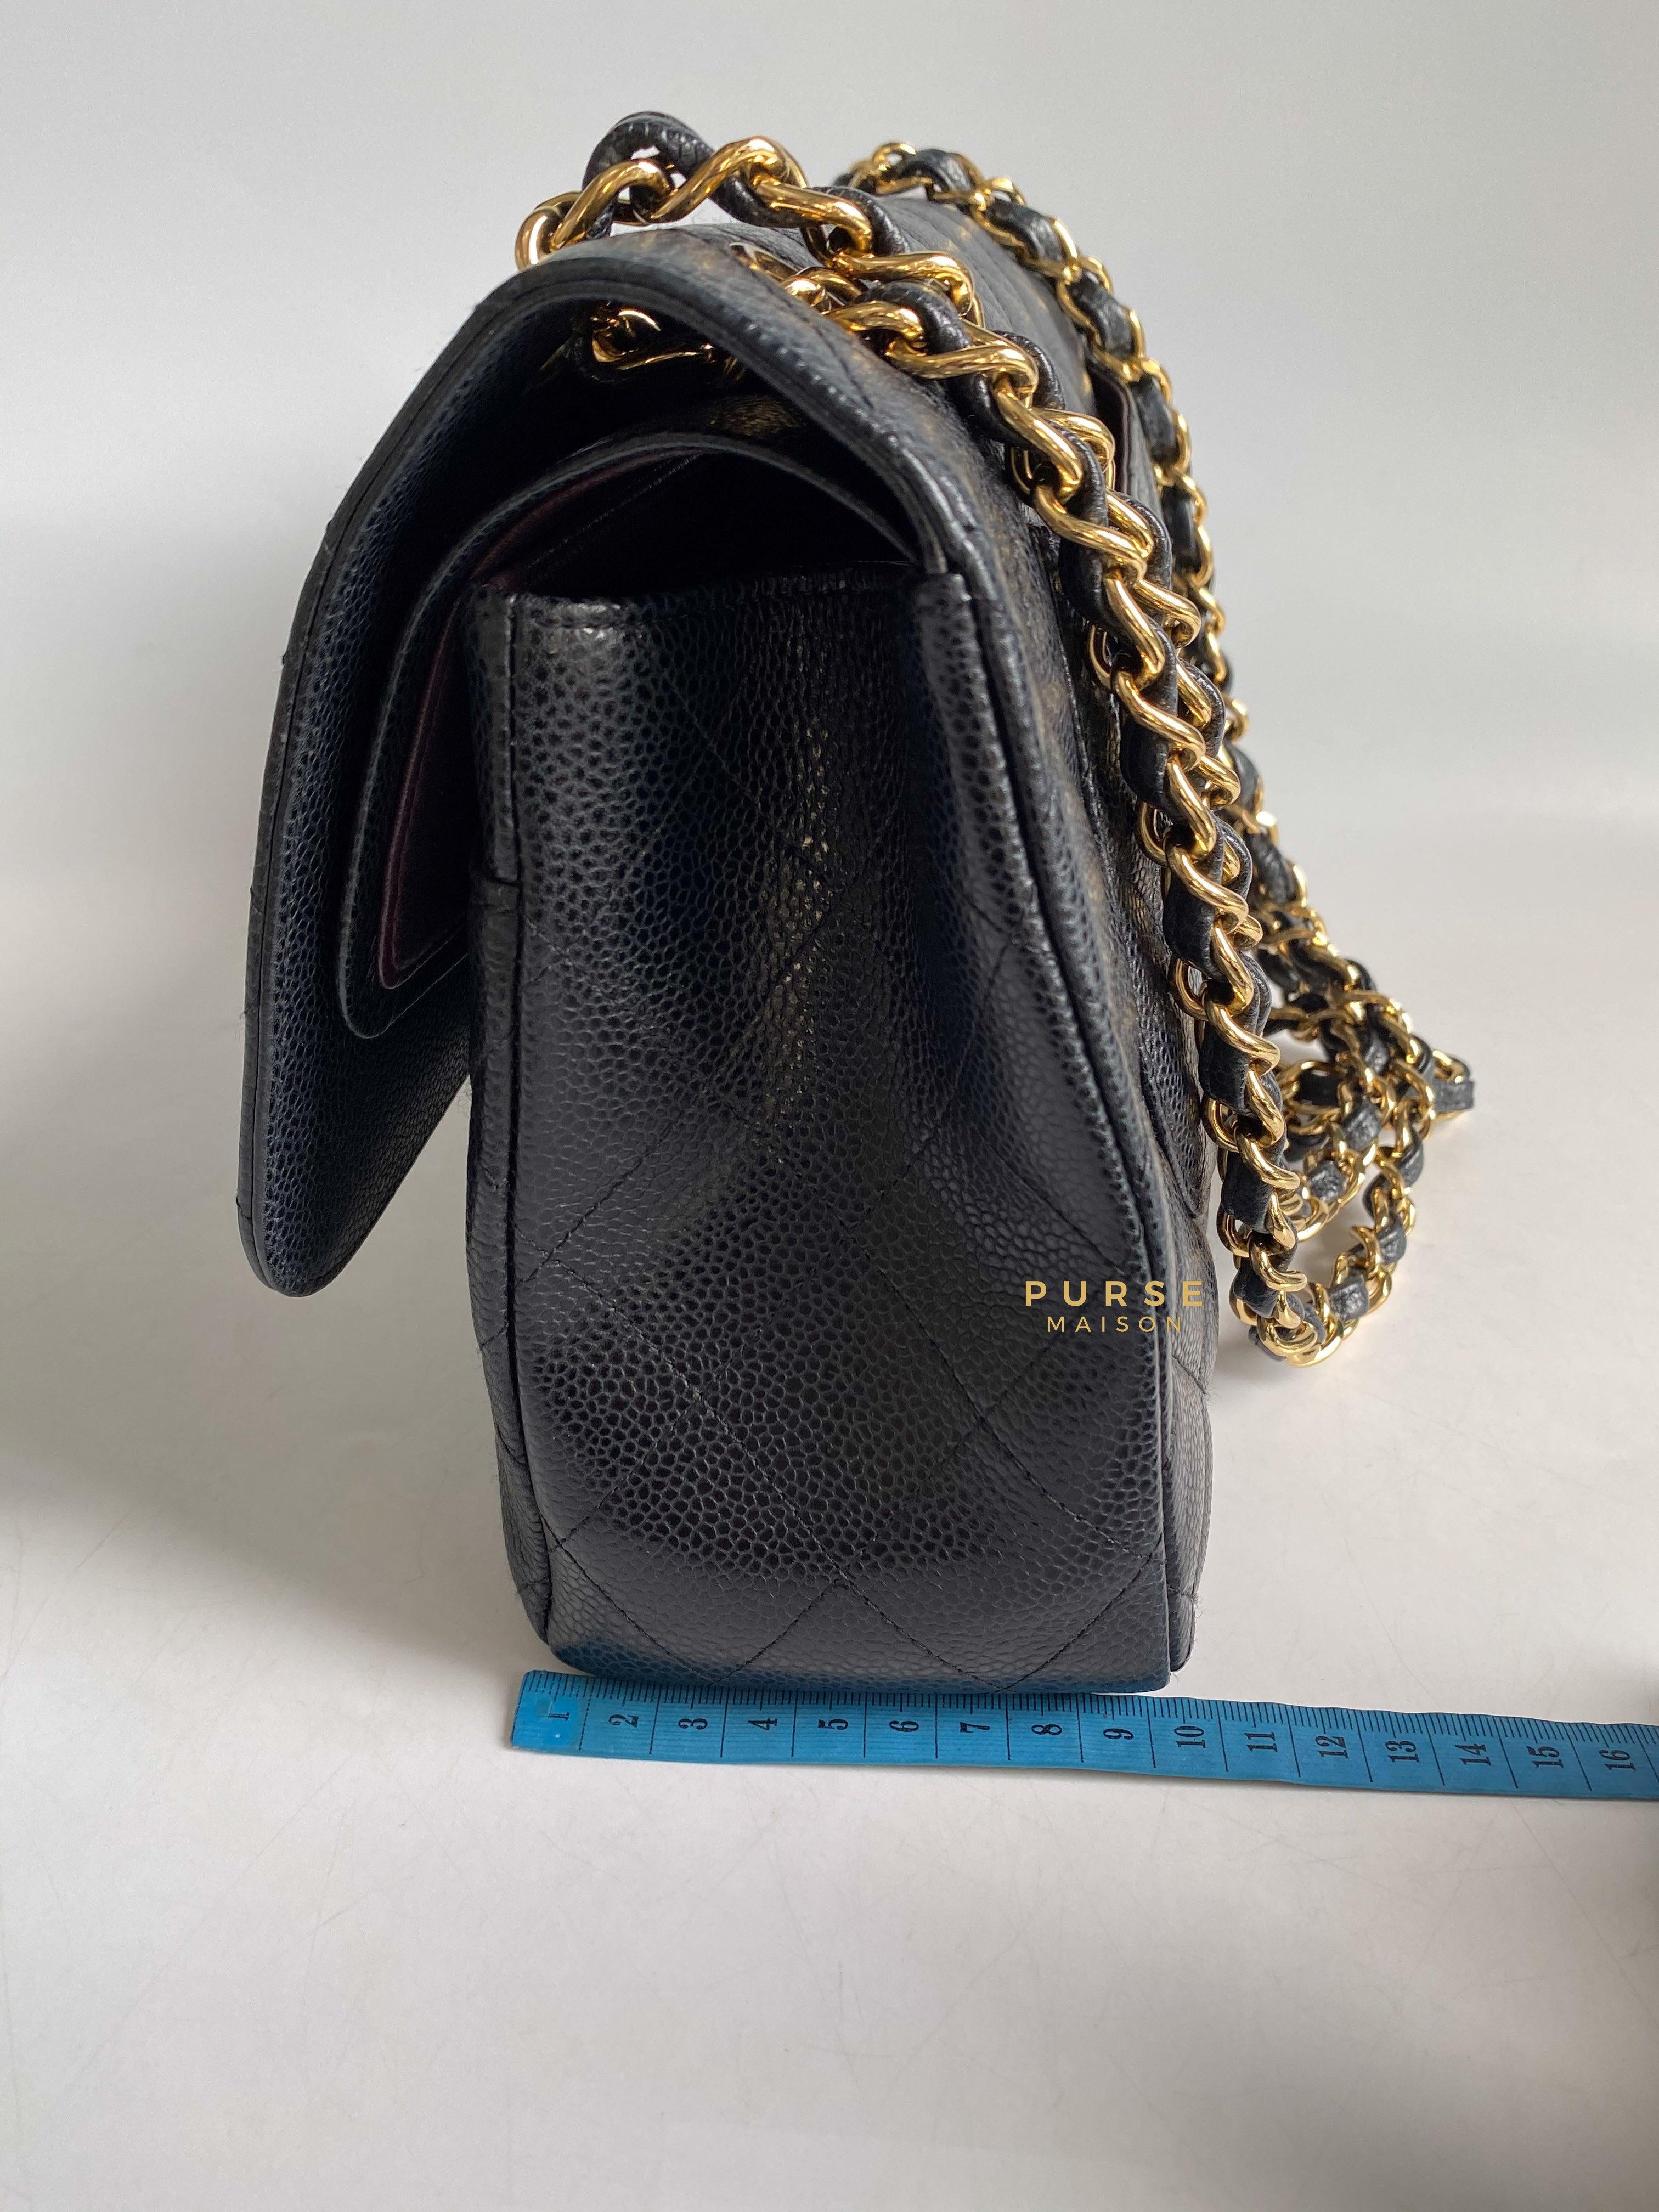 Chanel Classic Double Flap Jumbo Black Caviar Leather and Gold Hardware Series 22 | Purse Maison Luxury Bags Shop